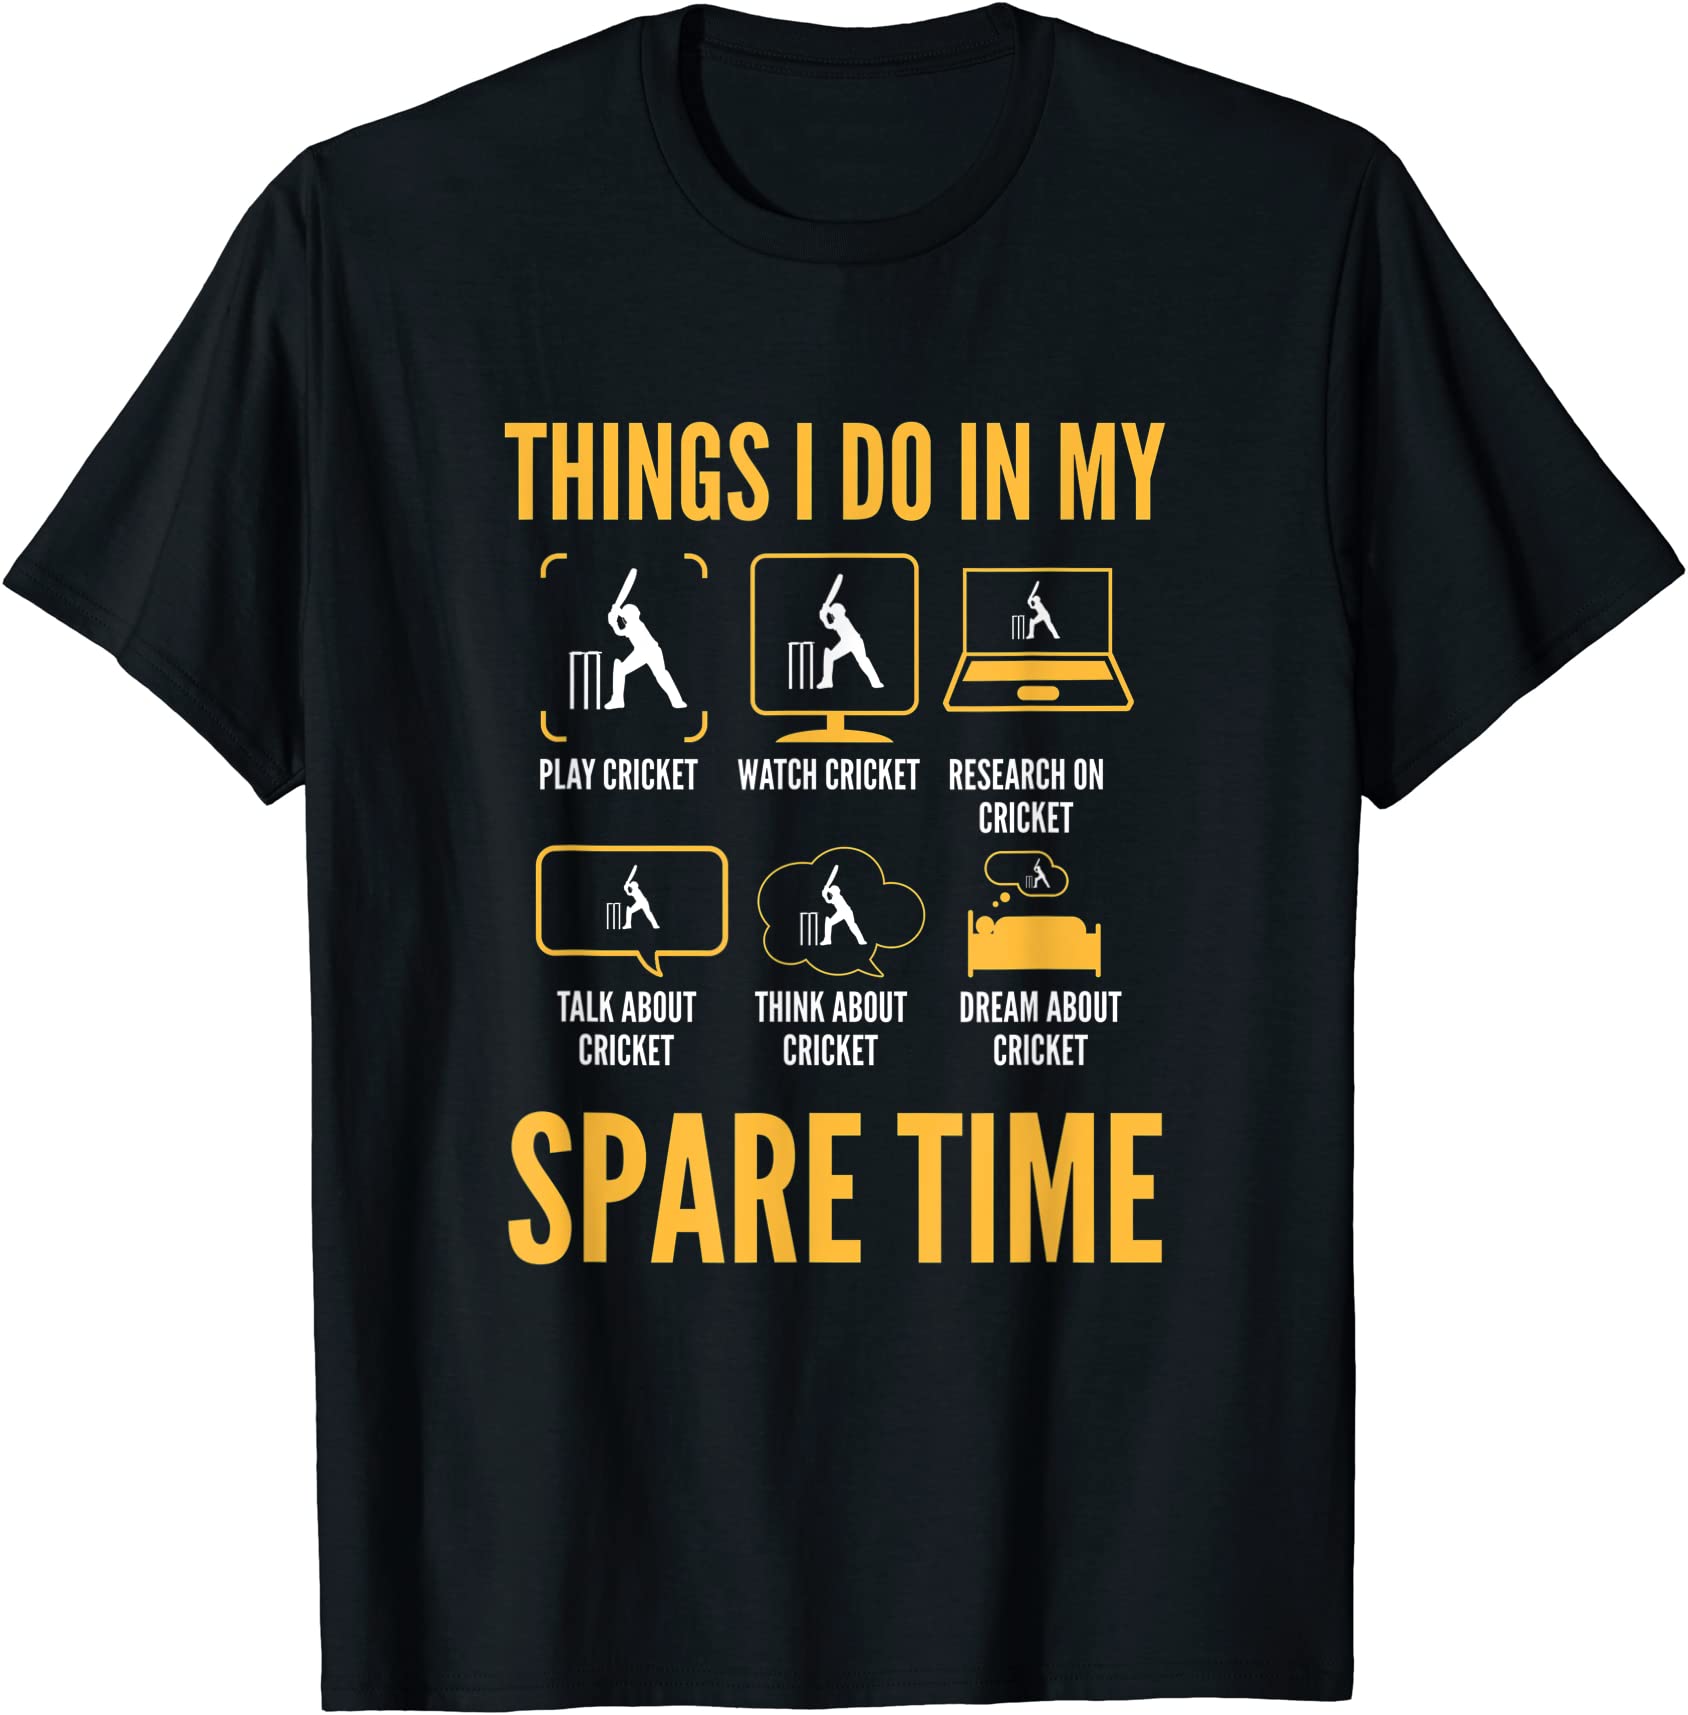 funny cricket things to do in my spare time t shirt men - Buy t-shirt ...